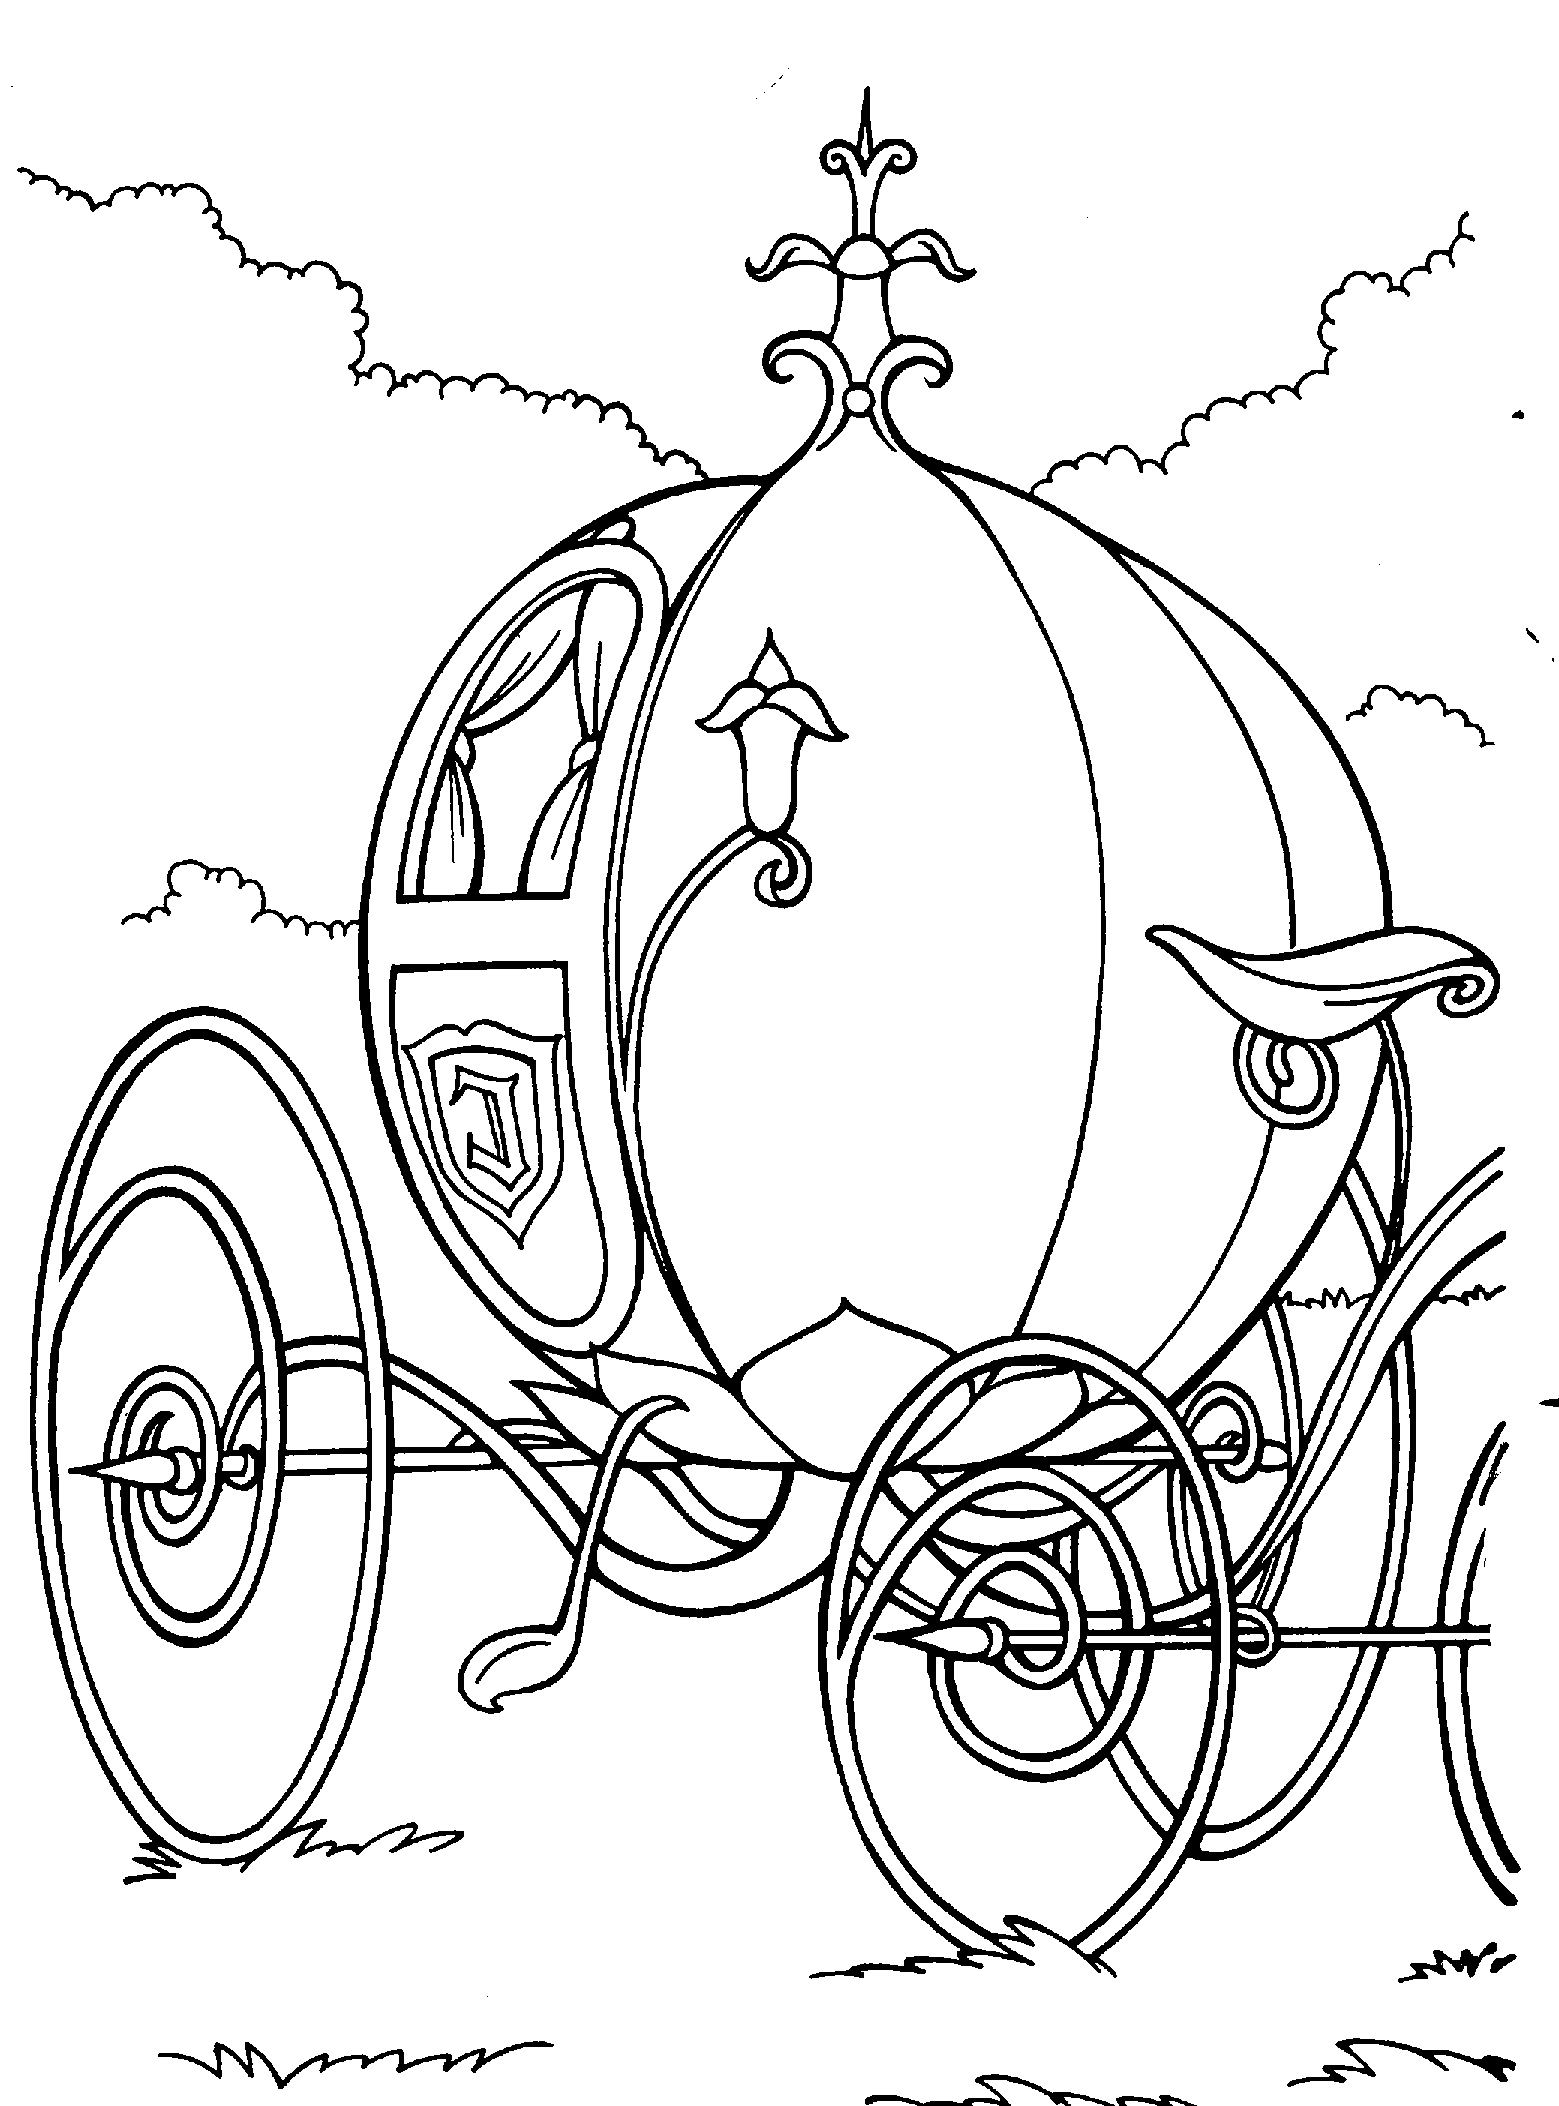 cinderella coloring pages free 10 images about cinderella on pinterest princess pages cinderella coloring free 